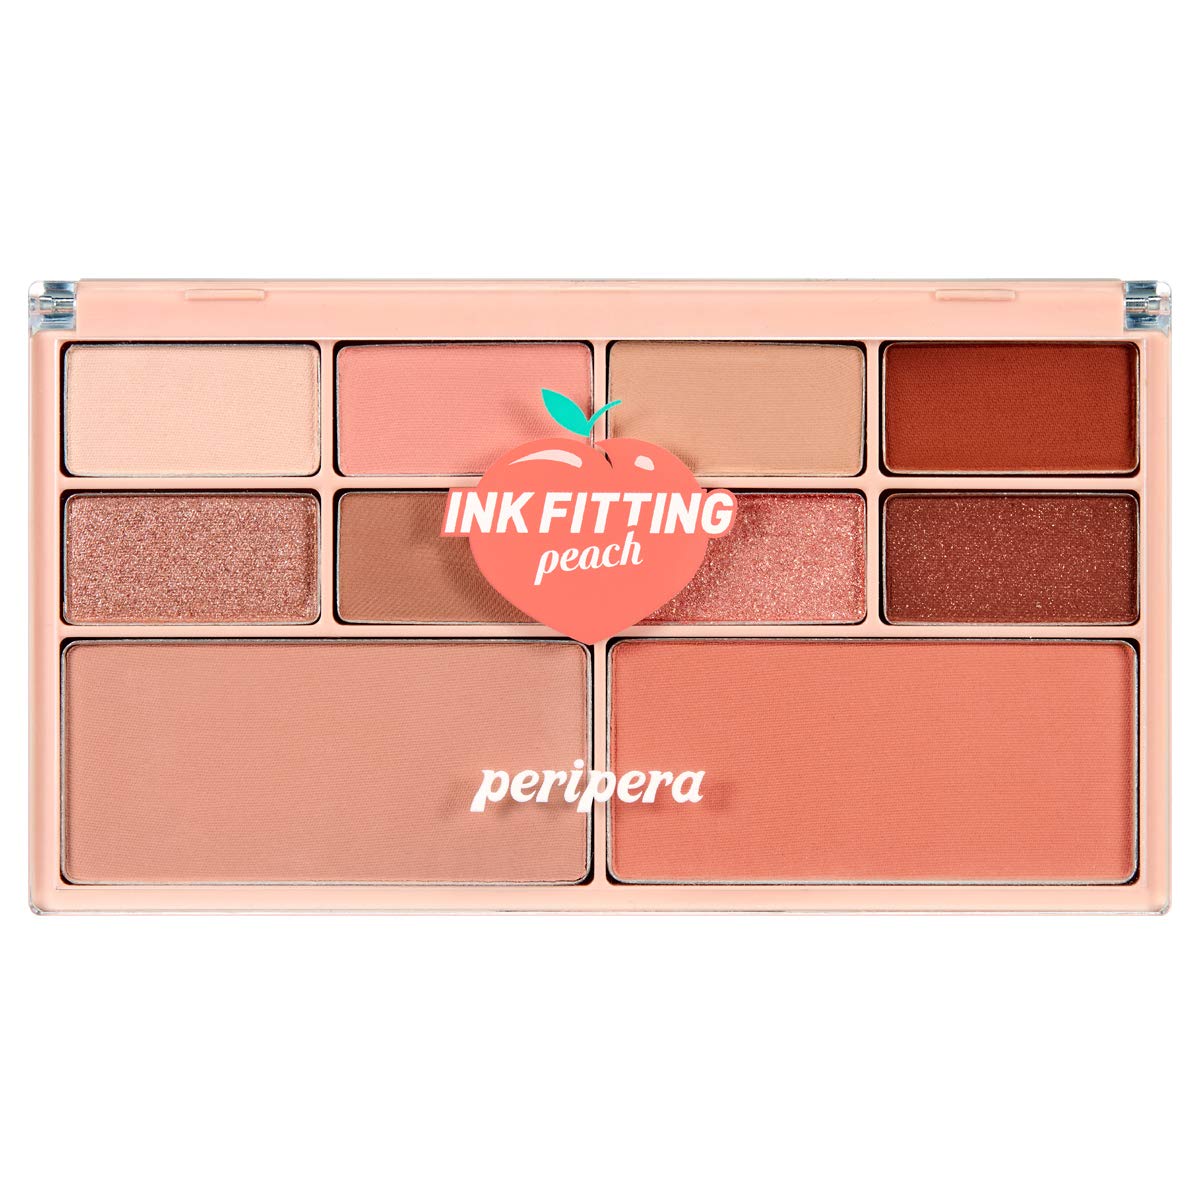 Peripera Ink Fitting Color Palette - 04 Get Peach With Me